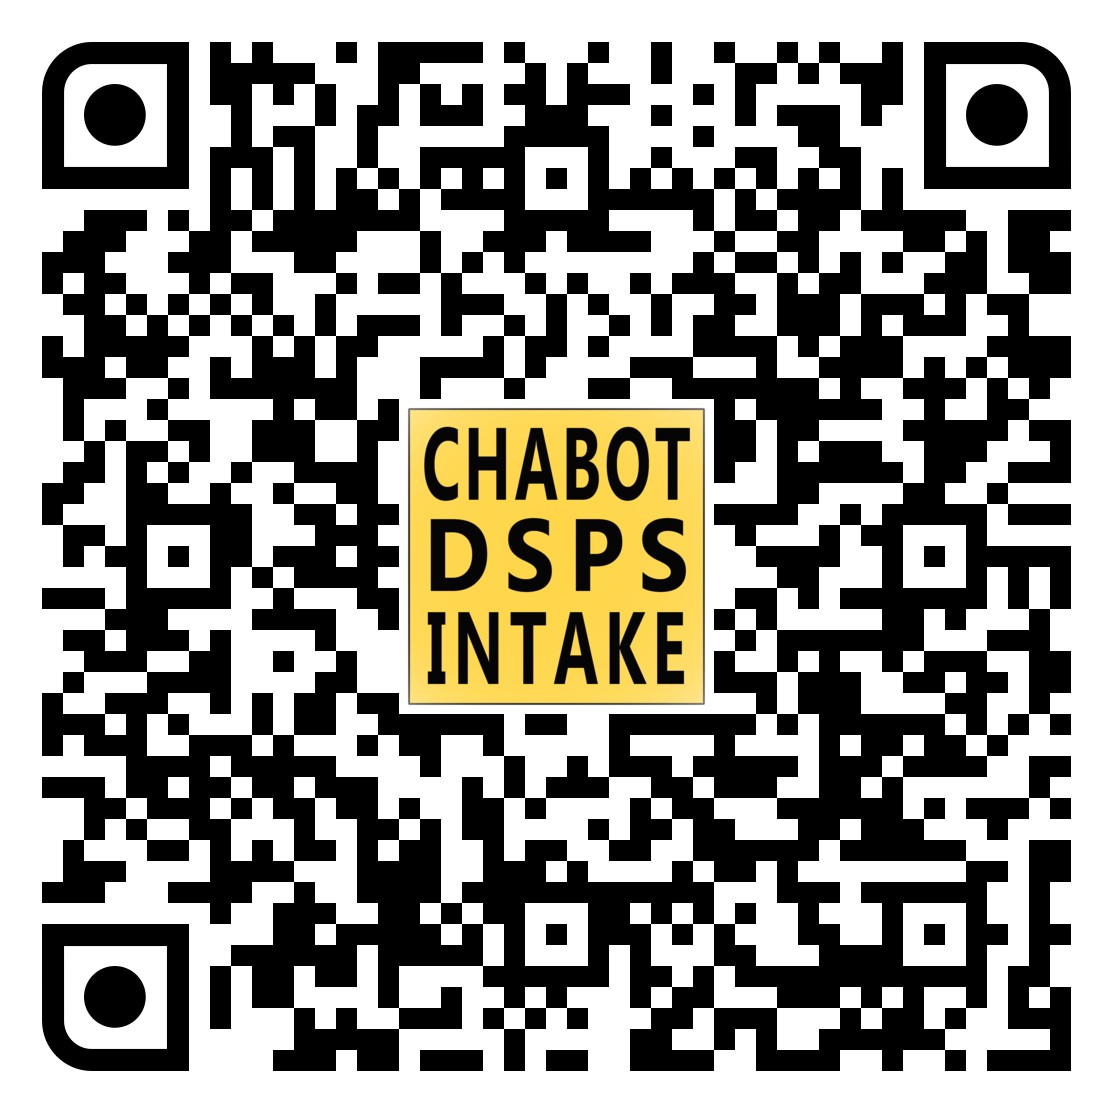 QR Code to DSPS Intake form